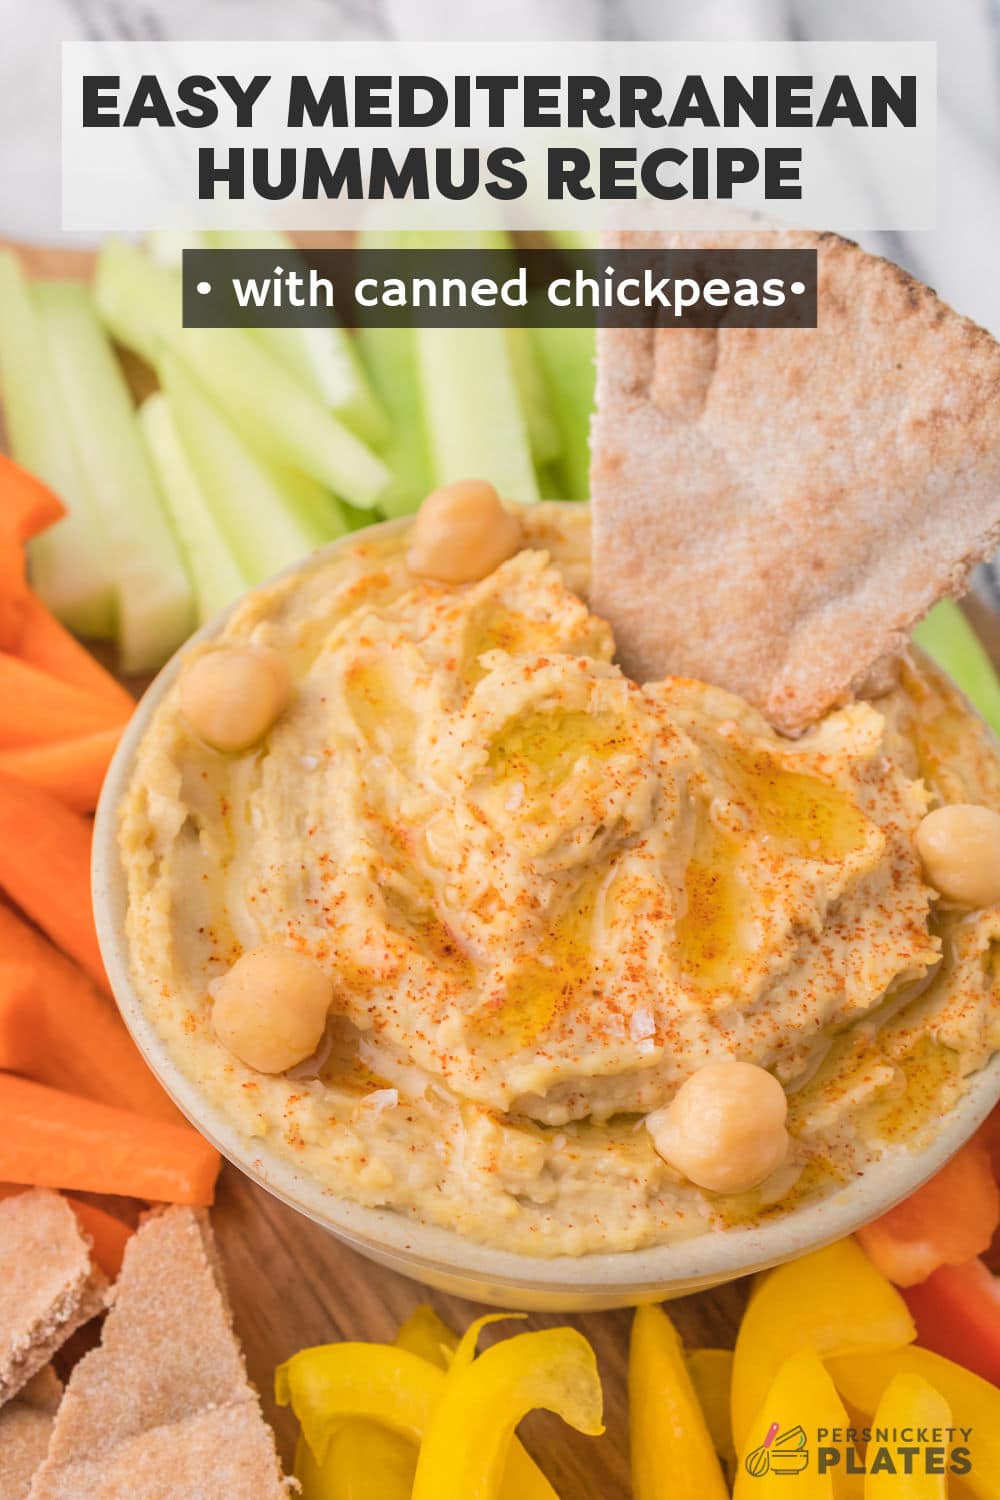 Thick and creamy, this Mediterranean Hummus recipe is loaded with flavor and ideal to eat with your favorite dippers like fresh veggies and your favorite crackers or pita bread. A staple in the Middle East, hummus is a healthy, versatile dip that comes together in just minutes with just a few basic ingredients. | www.persnicketyplates.com